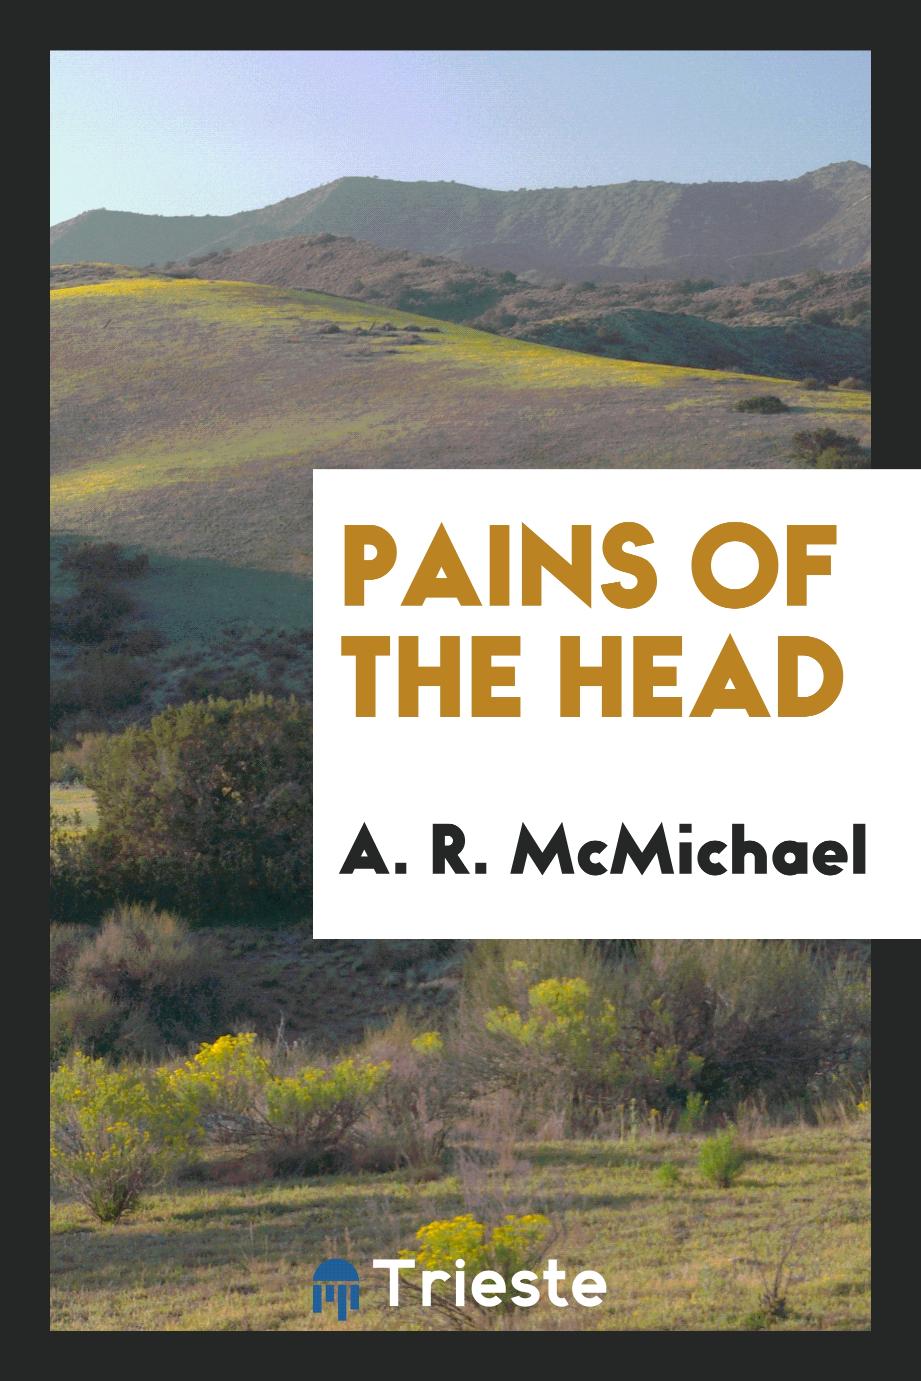 Pains of the head